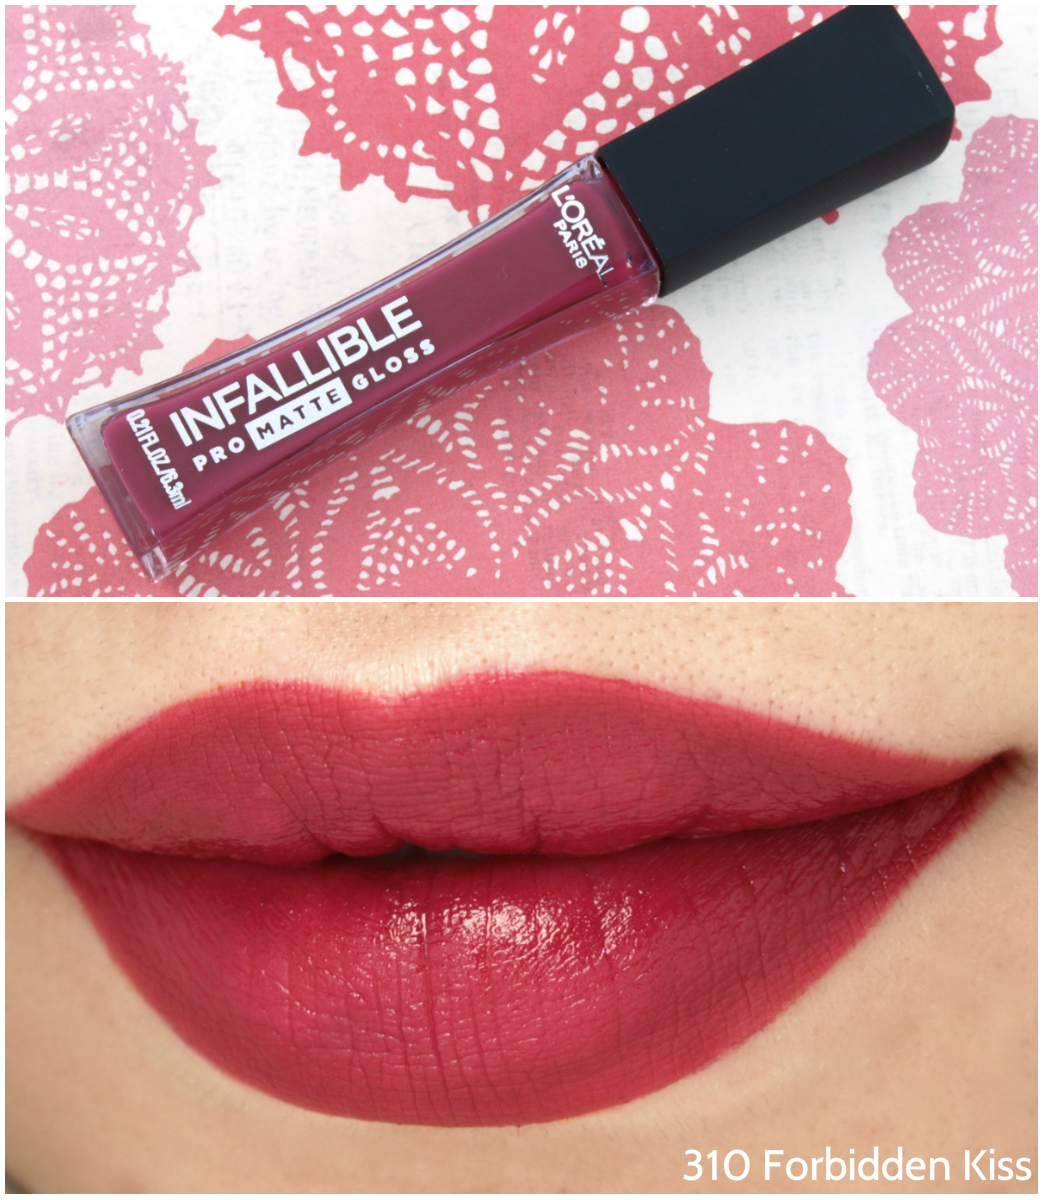 L'Oreal Infallible Pro-Matte Gloss in 